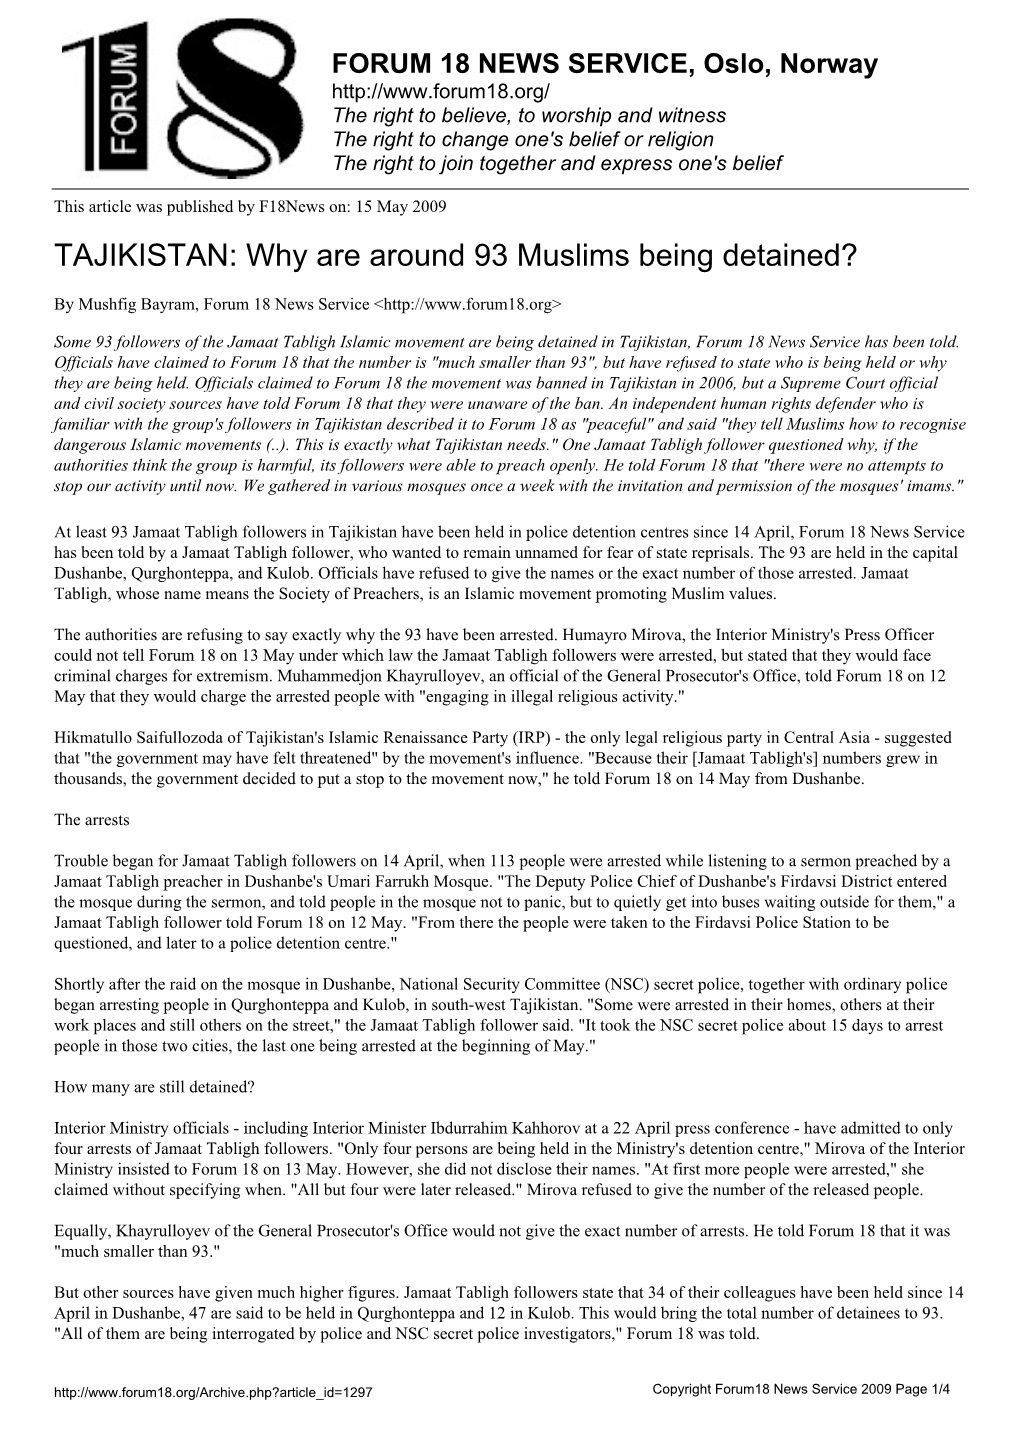 TAJIKISTAN: Why Are Around 93 Muslims Being Detained?